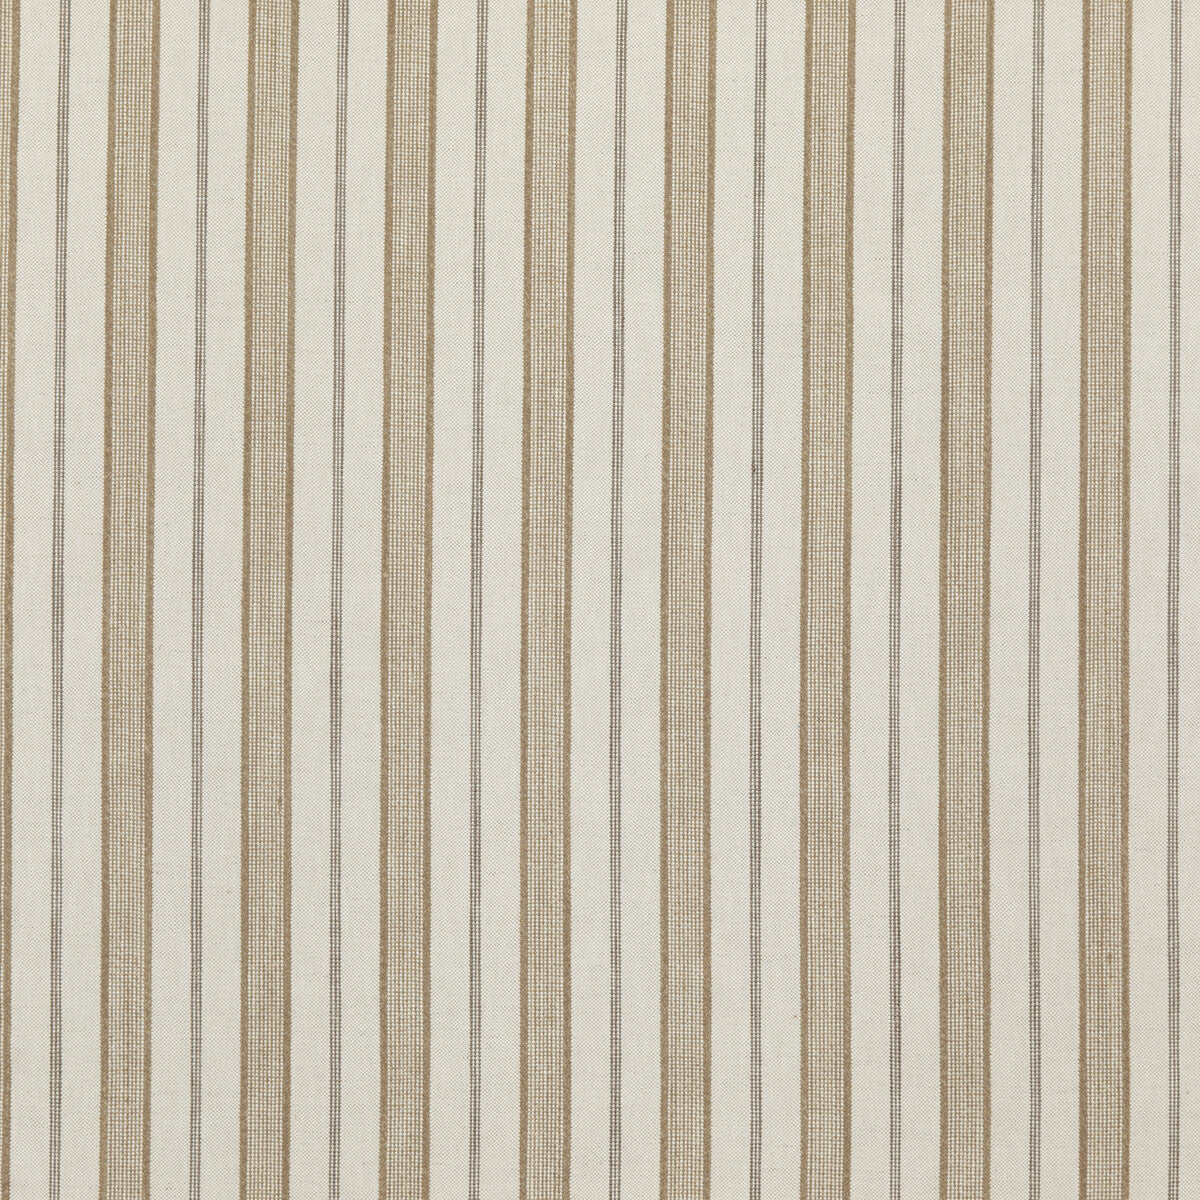 Stirling fabric in taupe color - pattern ED85313.210.0 - by Threads in the Great Stripes collection